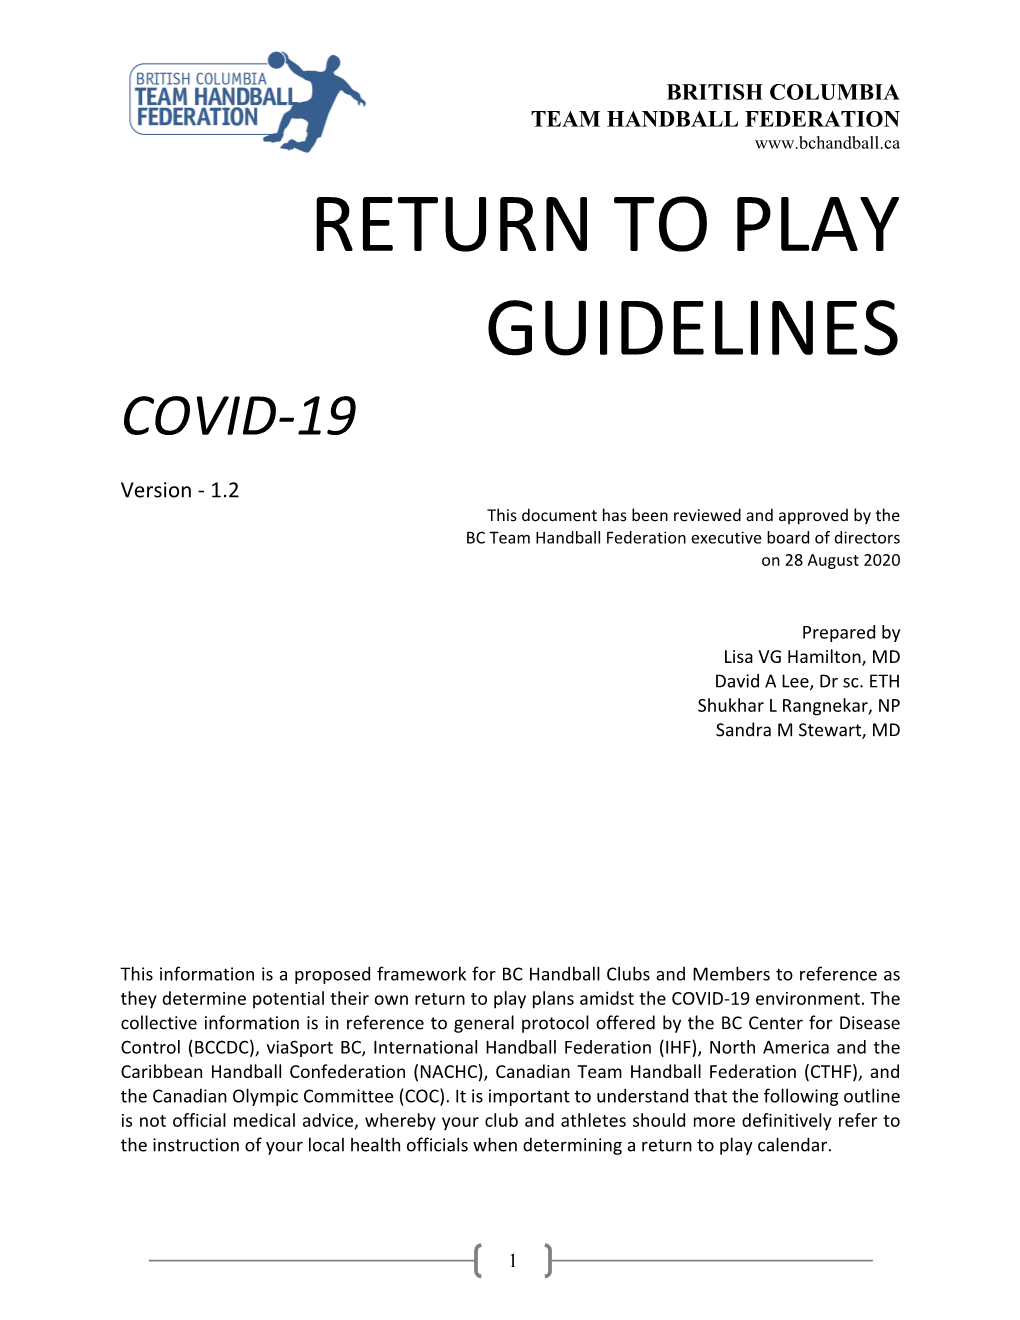 Play Guidelines Covid-19